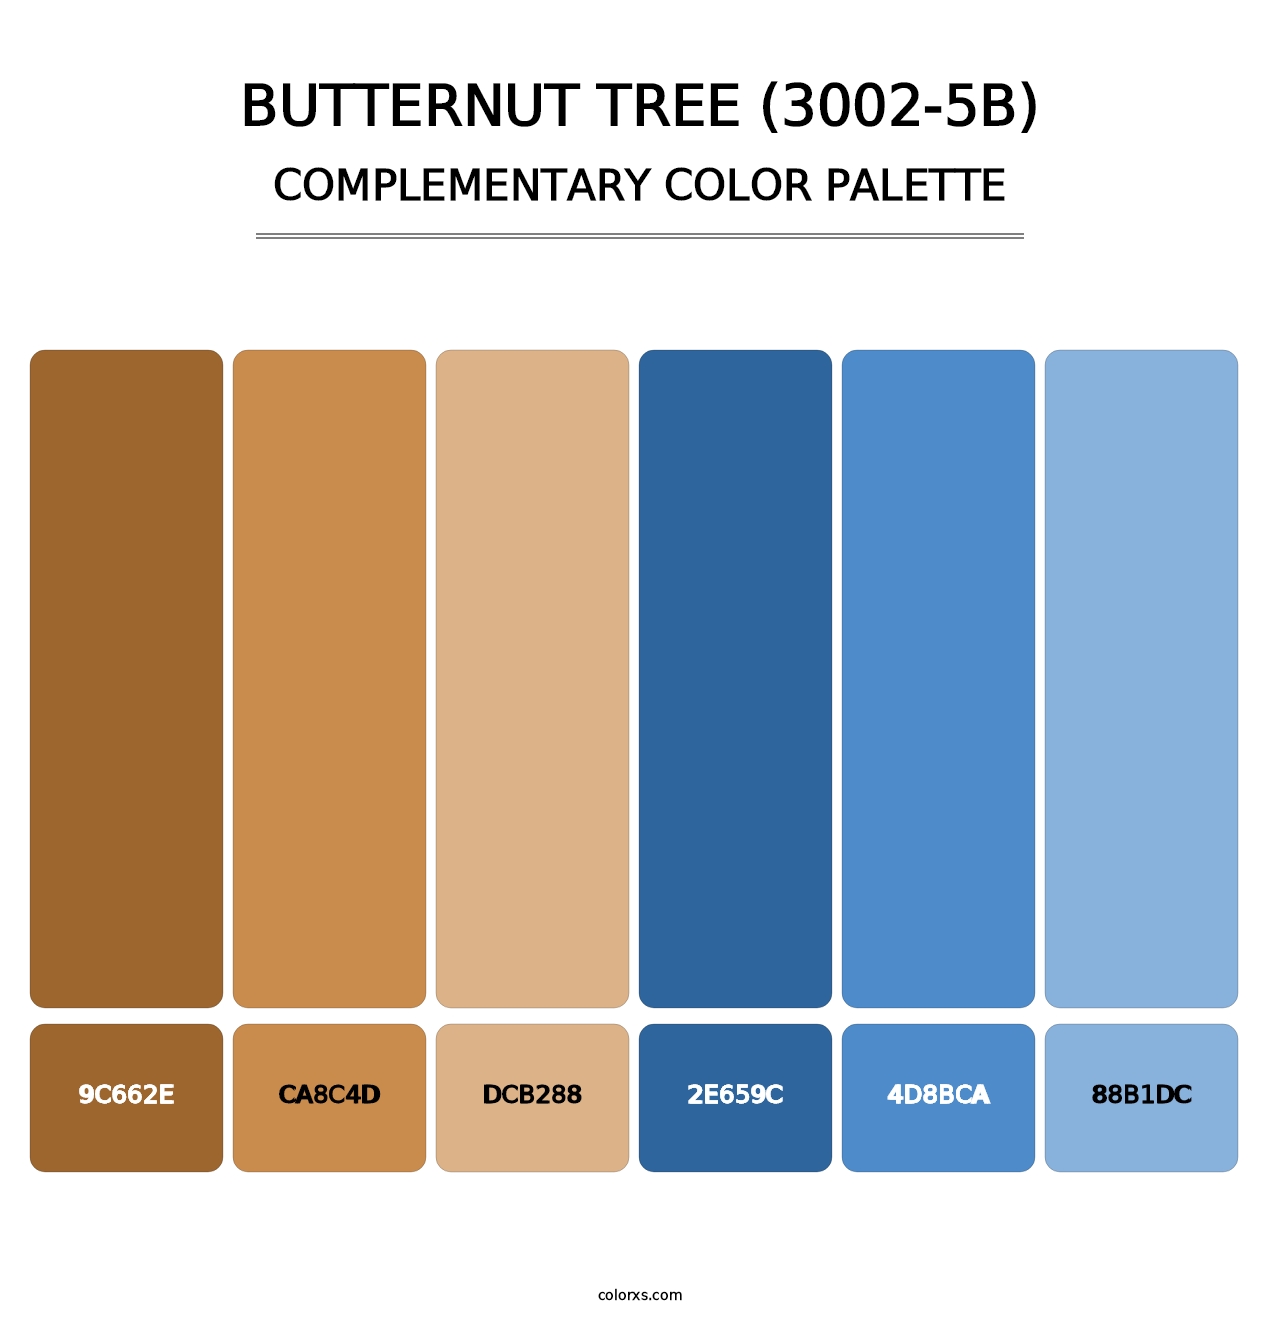 Butternut Tree (3002-5B) - Complementary Color Palette